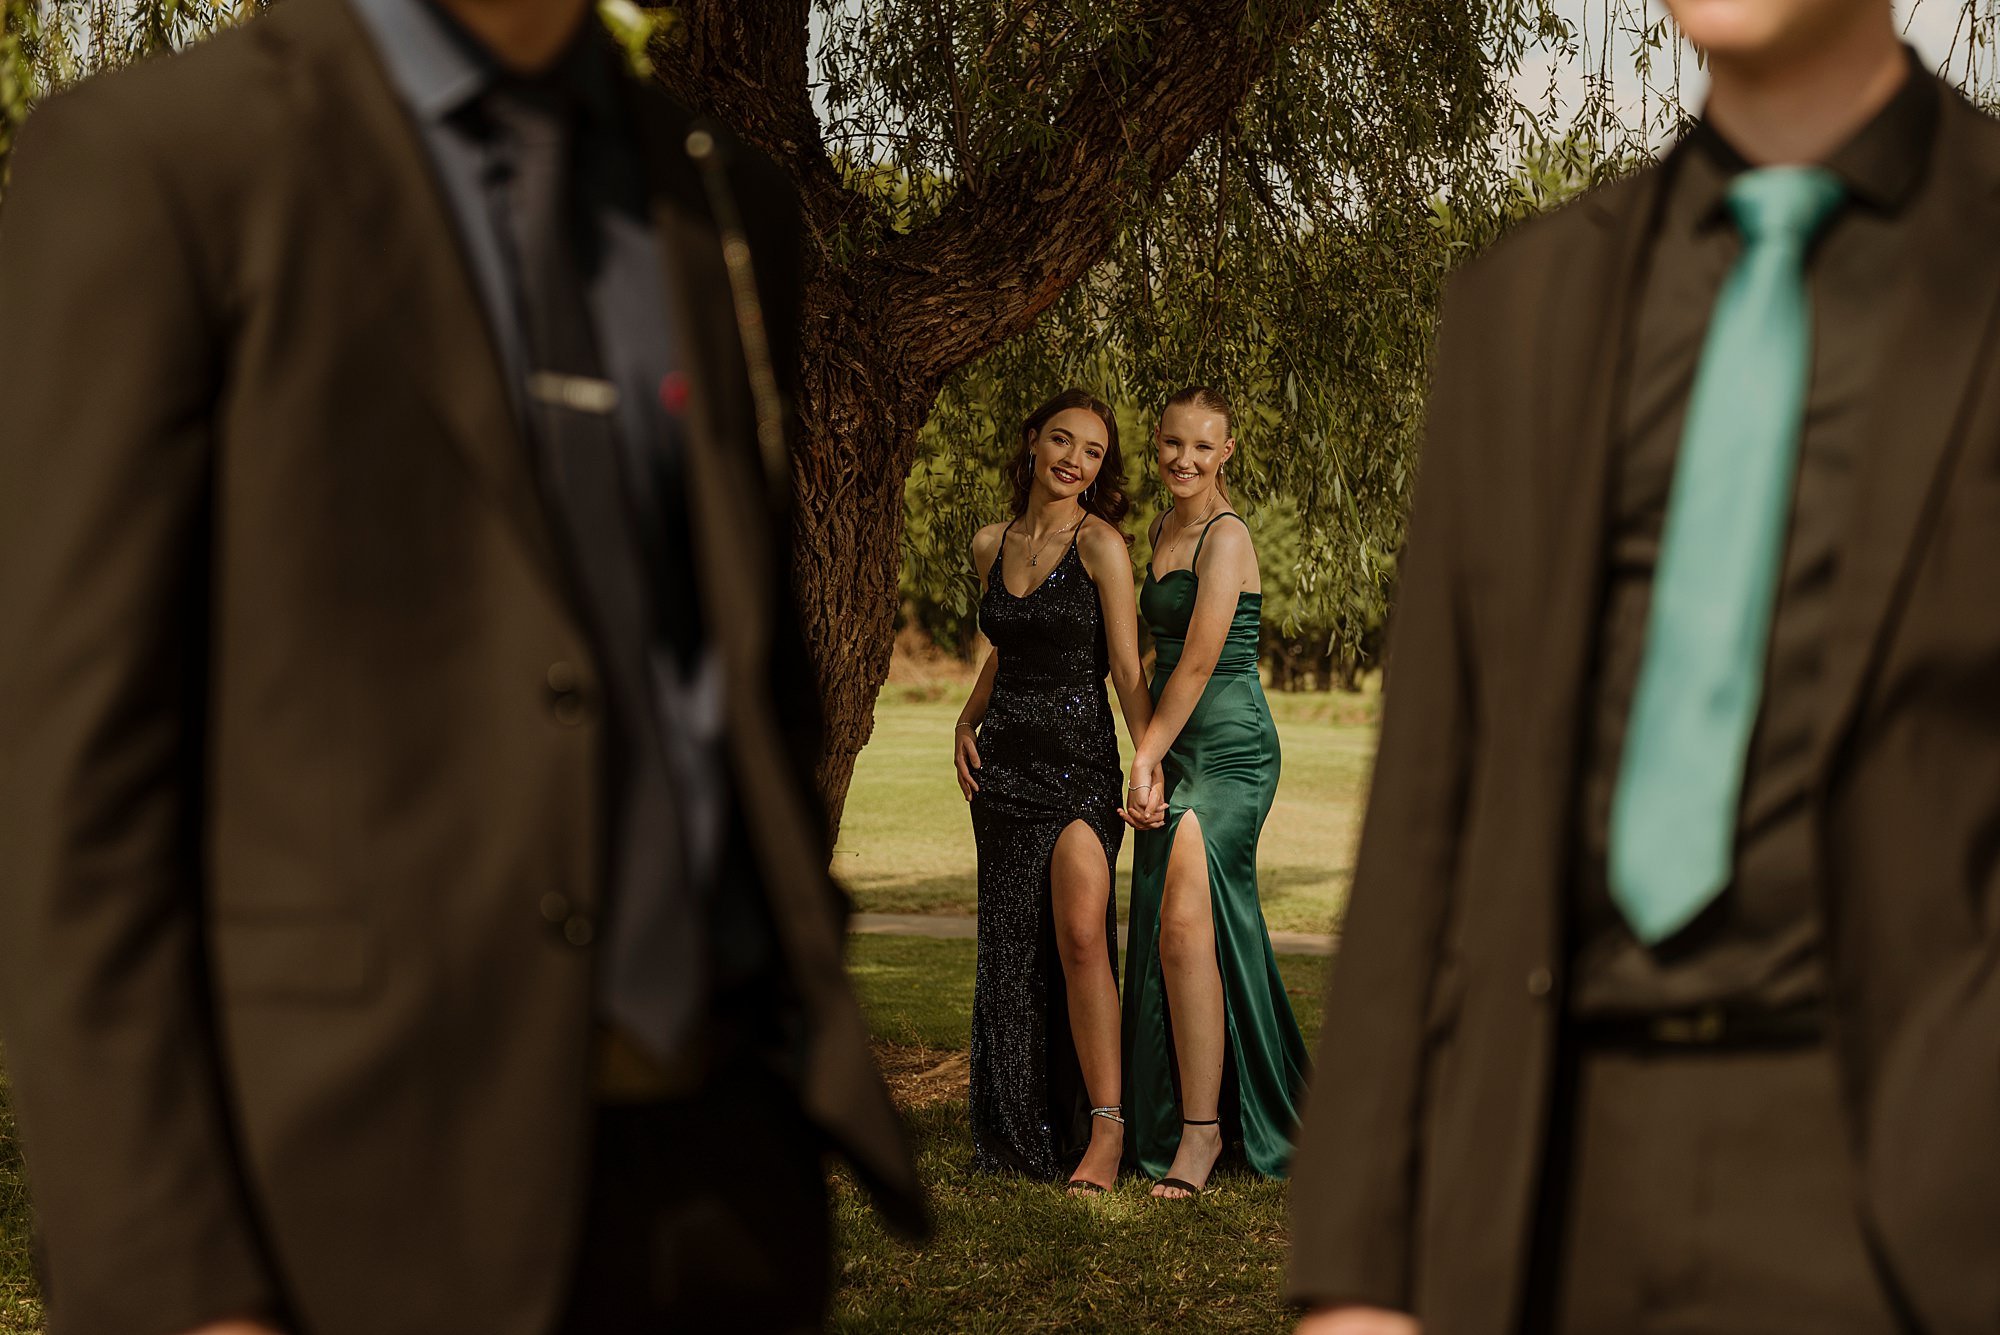 Zoe and friends' Matric Farewell